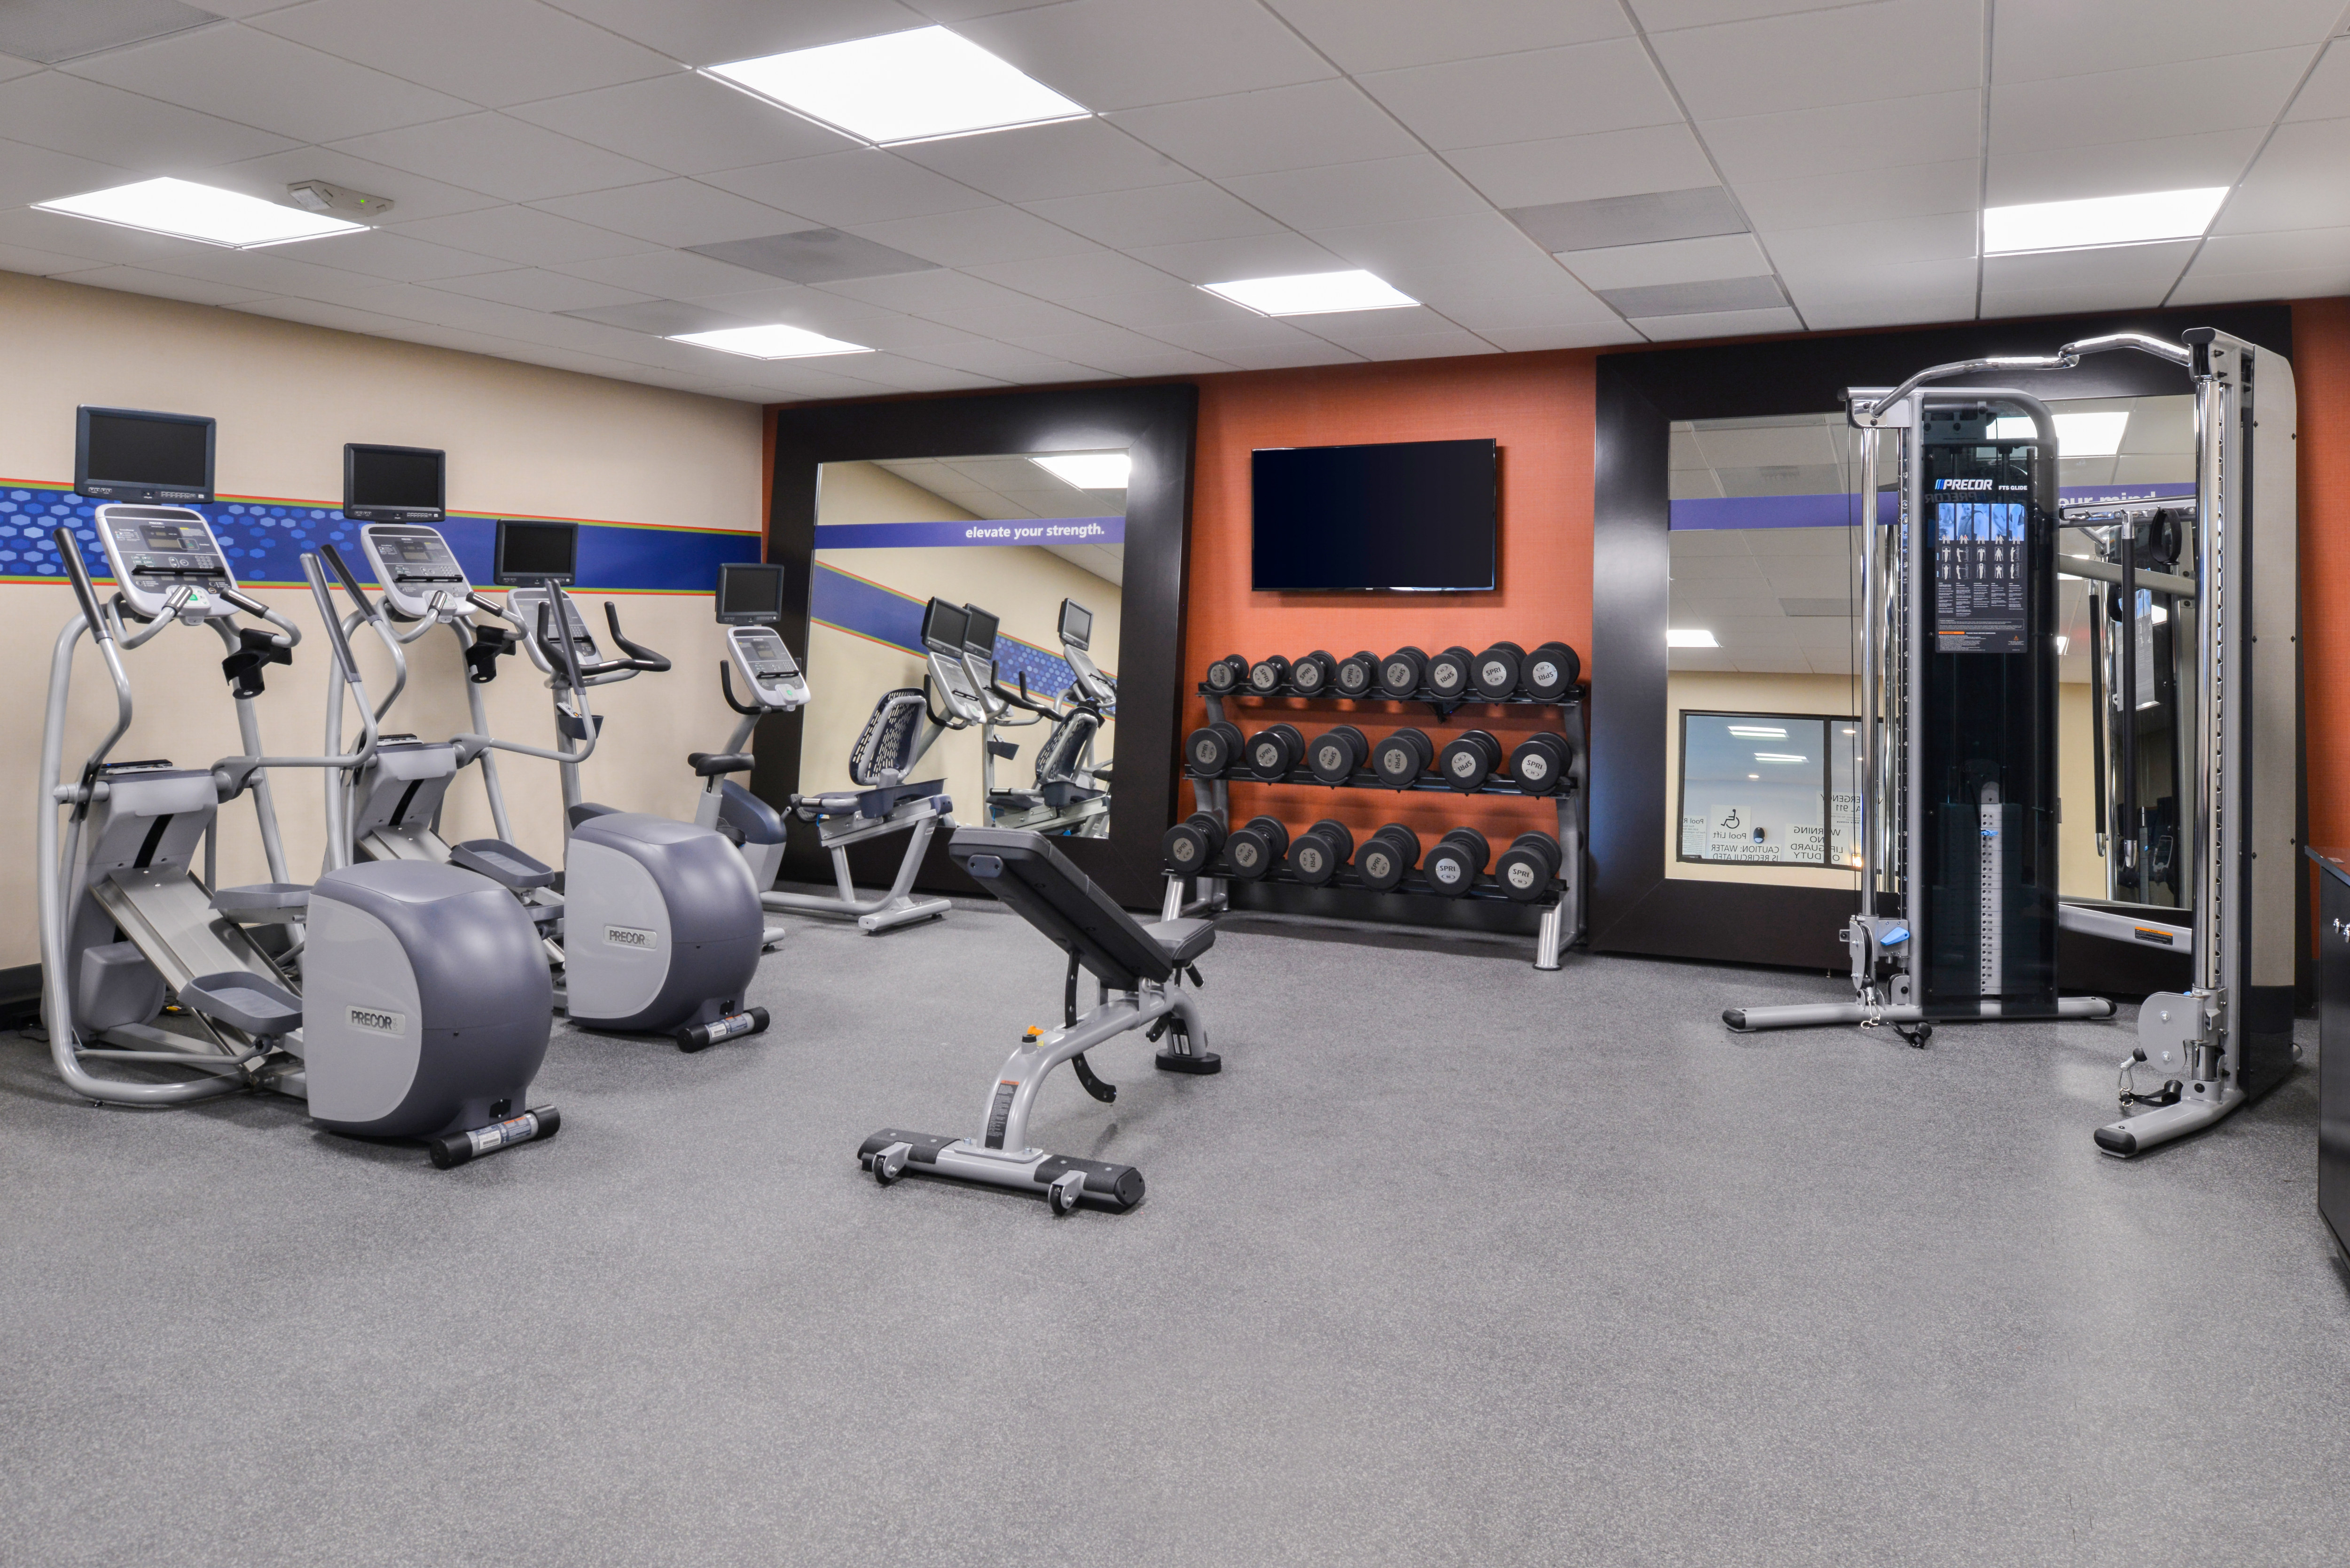 Fitness Center, Free Weights 